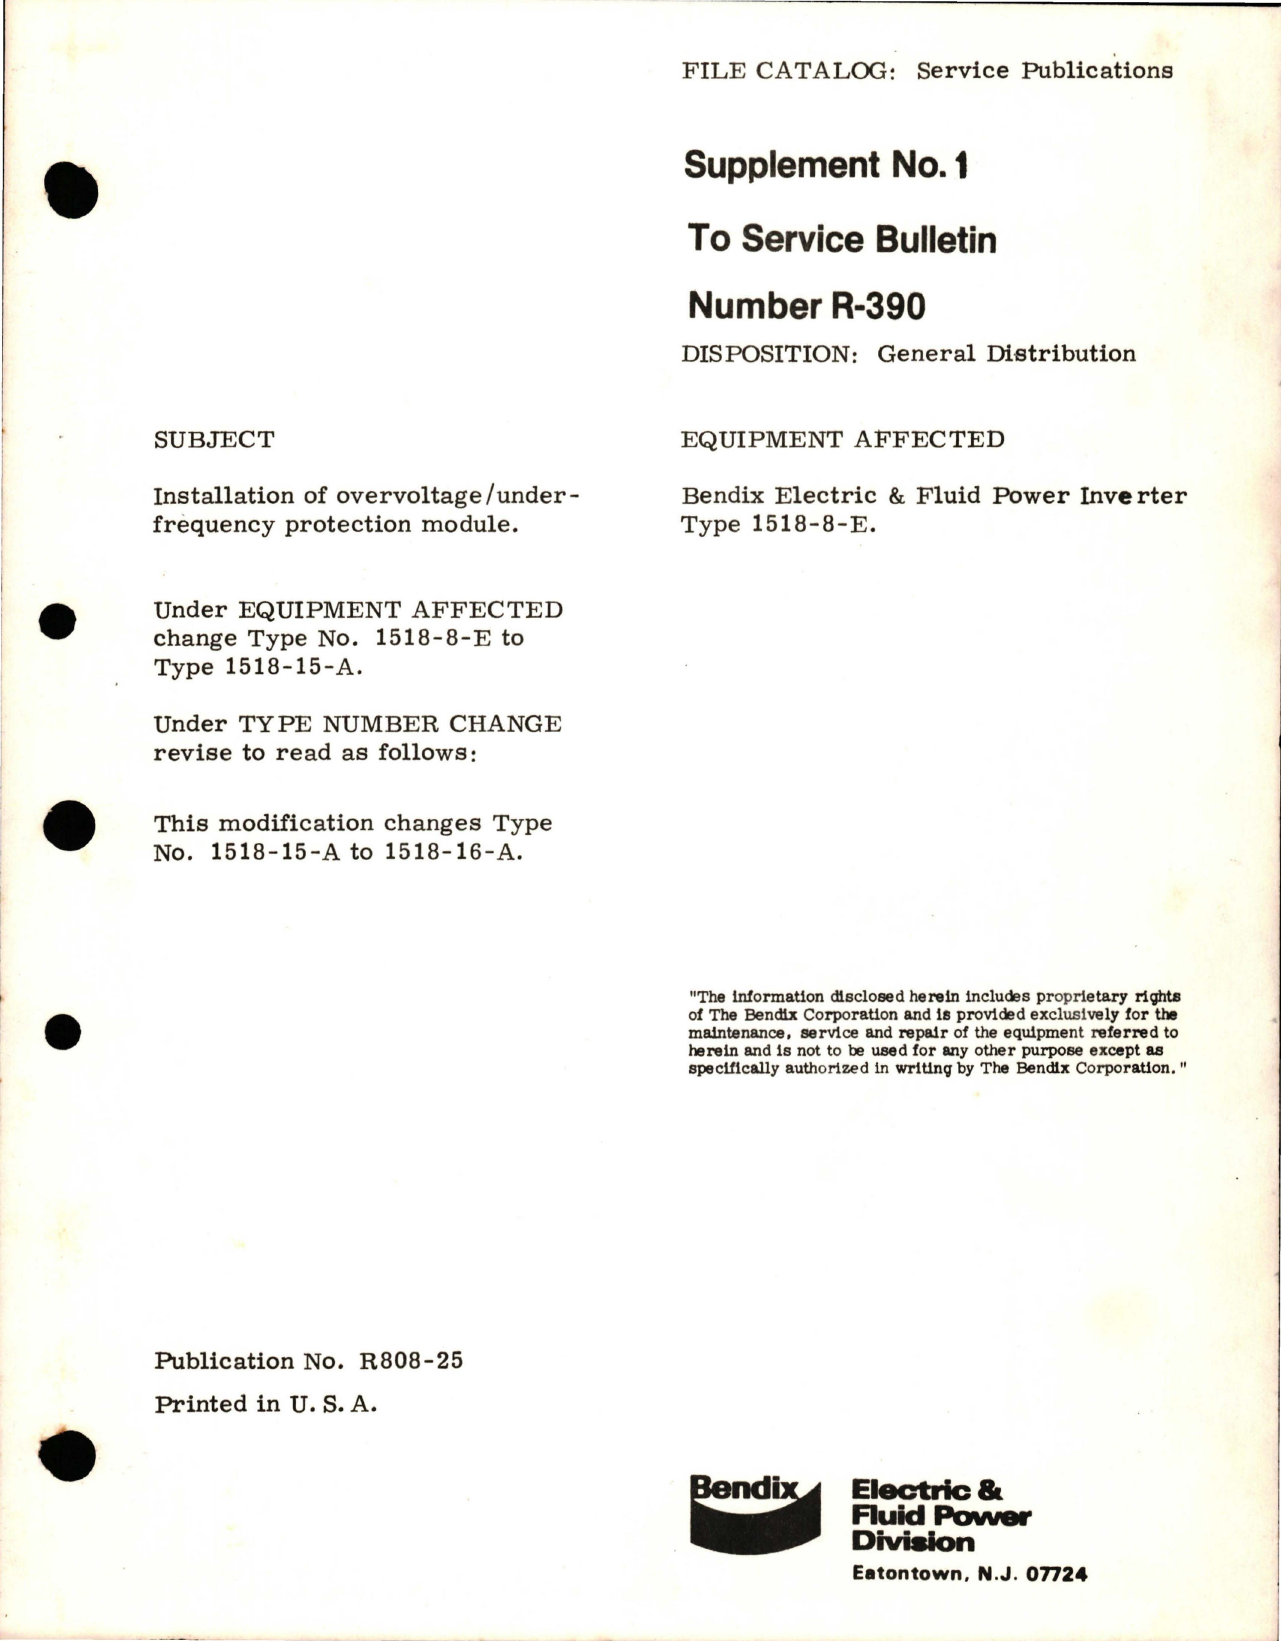 Sample page 1 from AirCorps Library document: Supplement No. 1 to Service Bulletin No. R-390 for Installation of Overvoltage/Under-frequency Protection Module - Type 1518-8-E